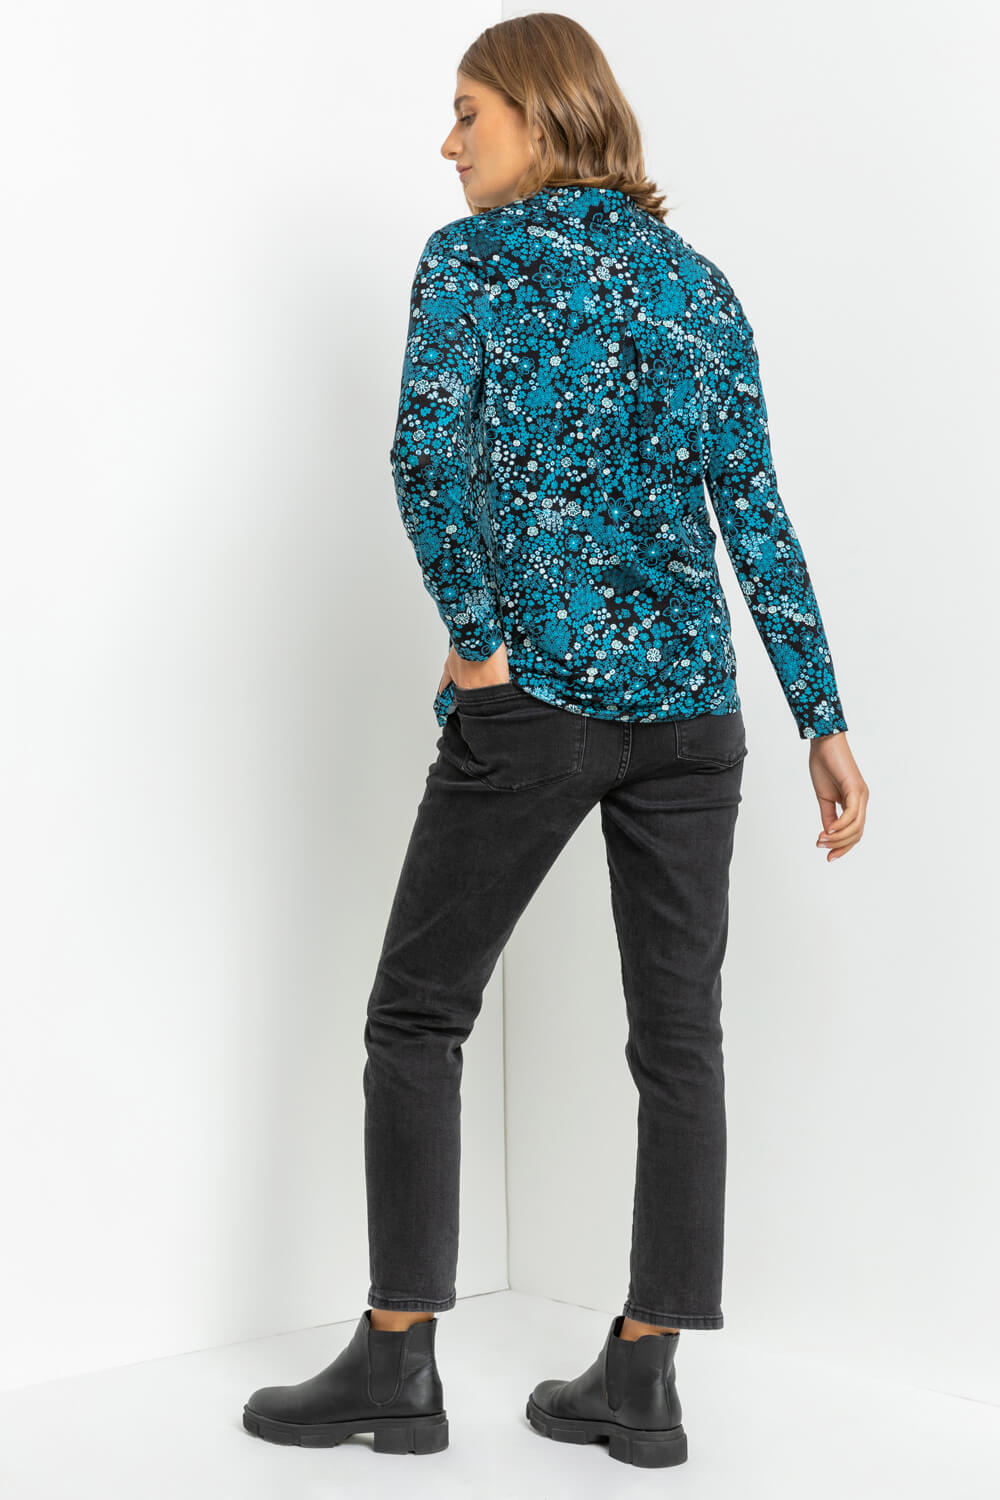 Teal Contrast Floral Print Long Sleeve Jersey Shirt, Image 2 of 4